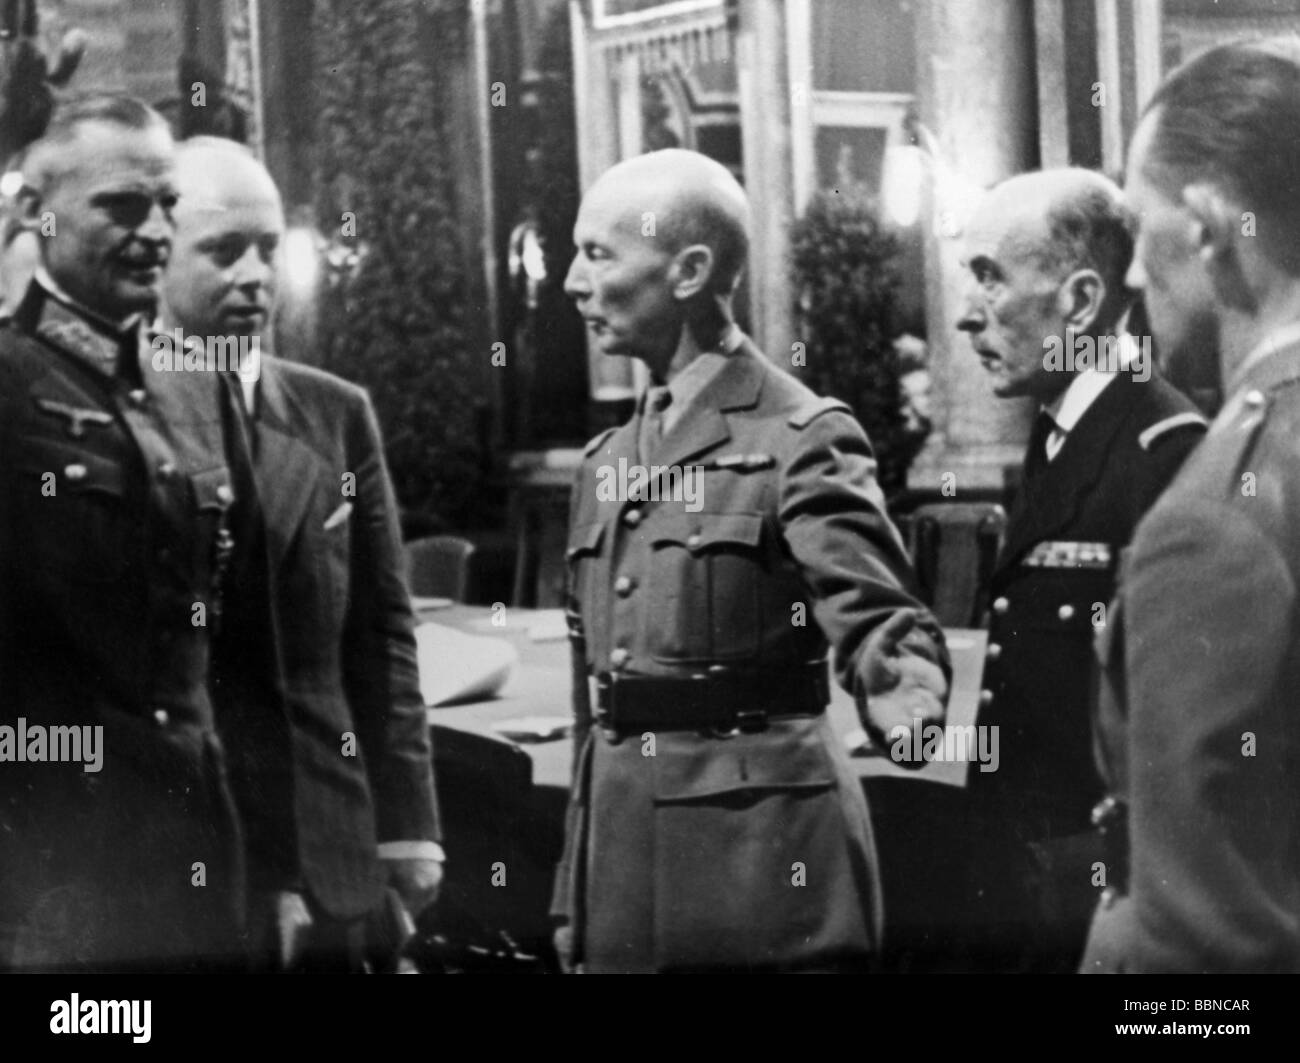 events, Second World War / WWII, France, preliminary peace negotiations, Wiesbaden, the French General Charles Huntziger talking with the German General Carl-Heinrich von Stuelpnagel, defeat, Germany, Third Reich, historic, historical, 20th century, Battle of France, National Socialism, end of the 3rd French Republic, Stulpnagel, Stülpnagel, Carl, Karl Heinrich, people, 1940s, Stock Photo